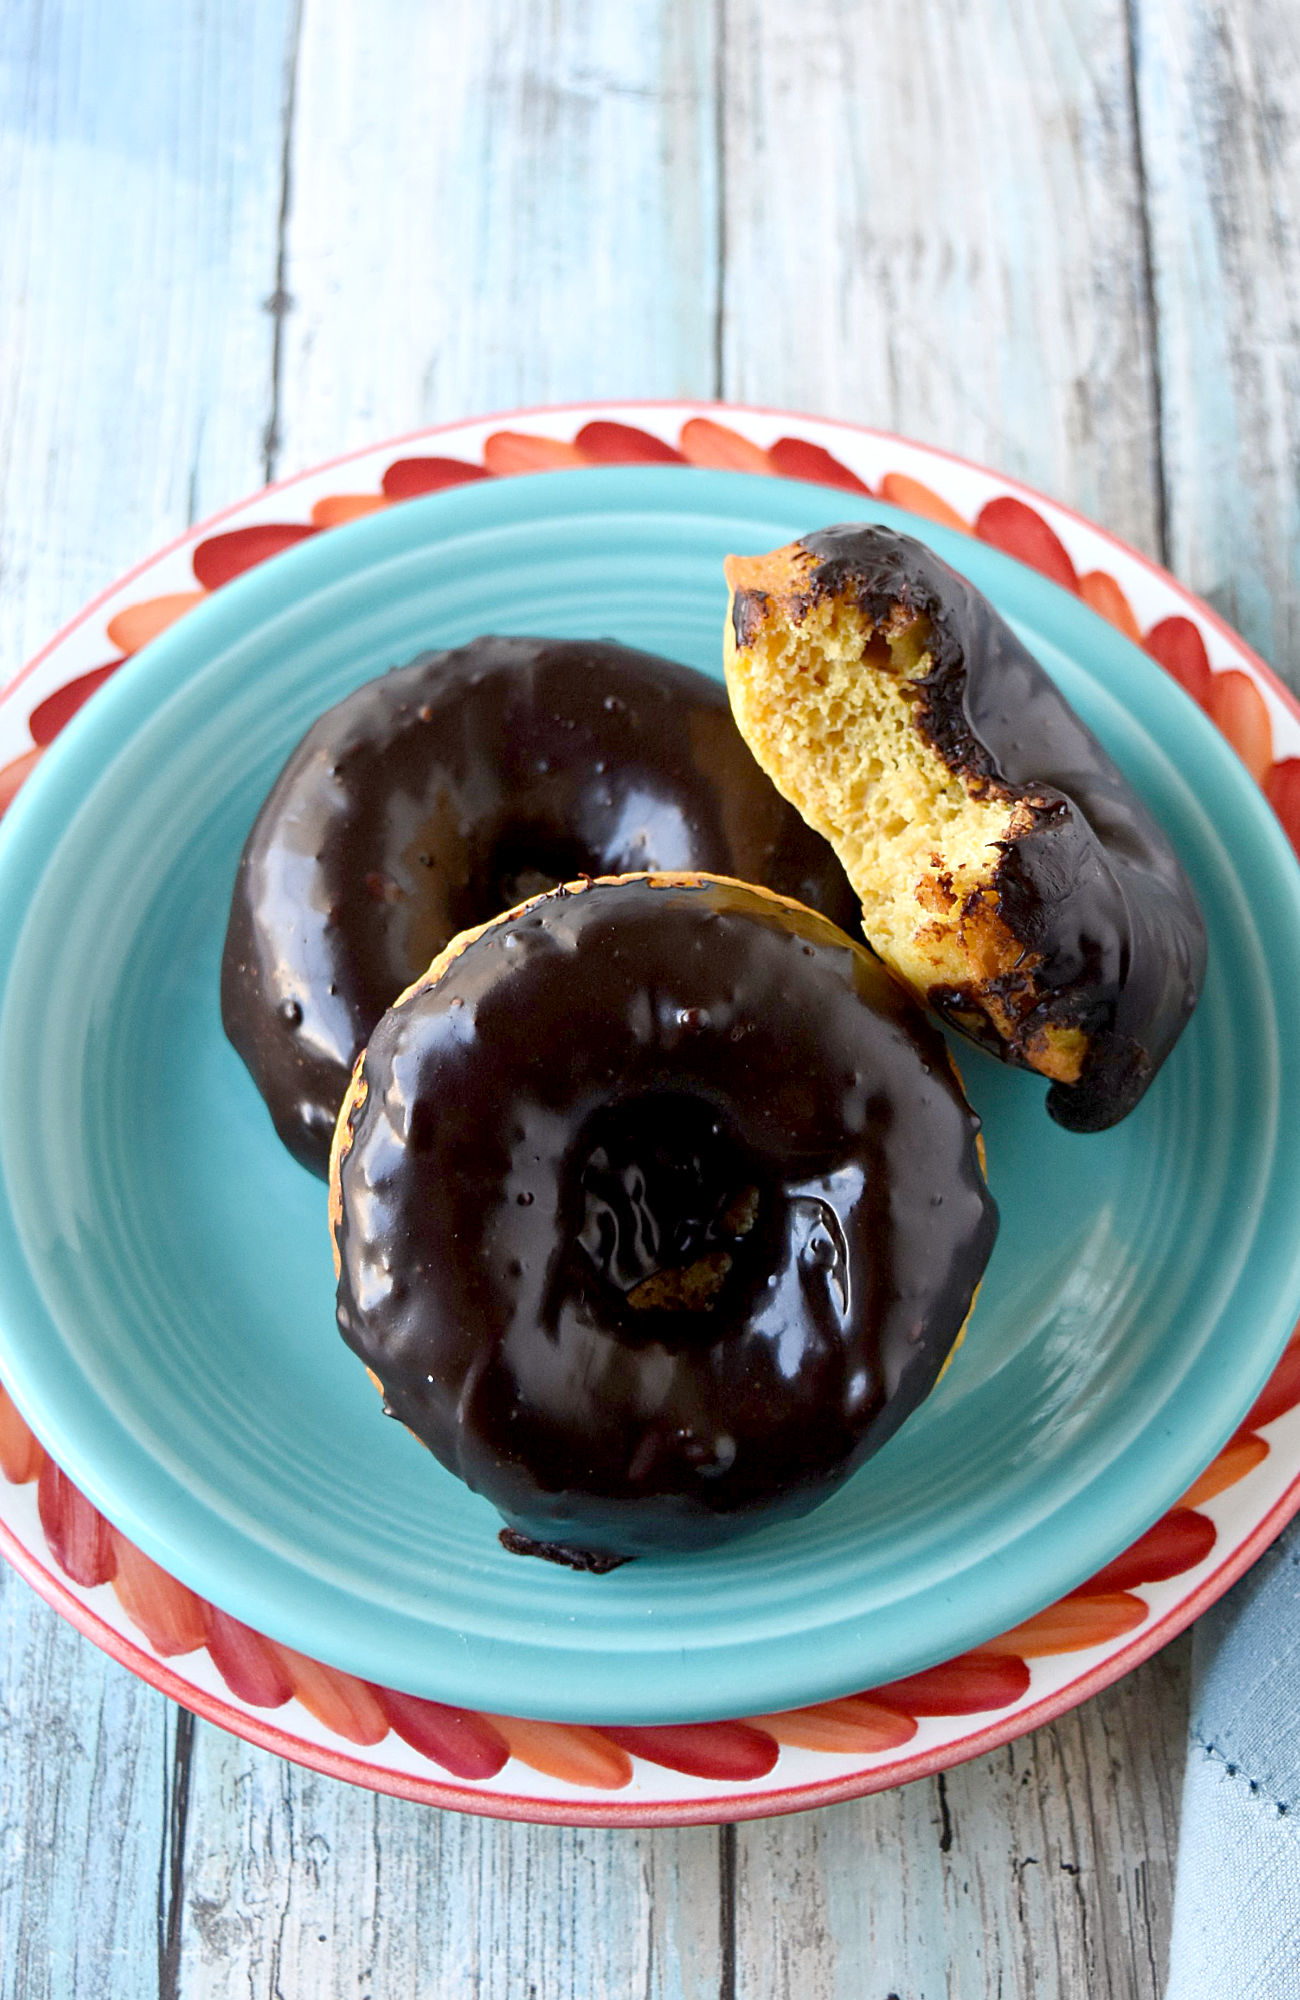 Mandarin Orange Donuts with Ganache Glaze are packed with mandarin orange flavor in a tender baked donut wrapper.  The chocolate scented ganache glaze is an added bonus. #SpringSweetsWeek